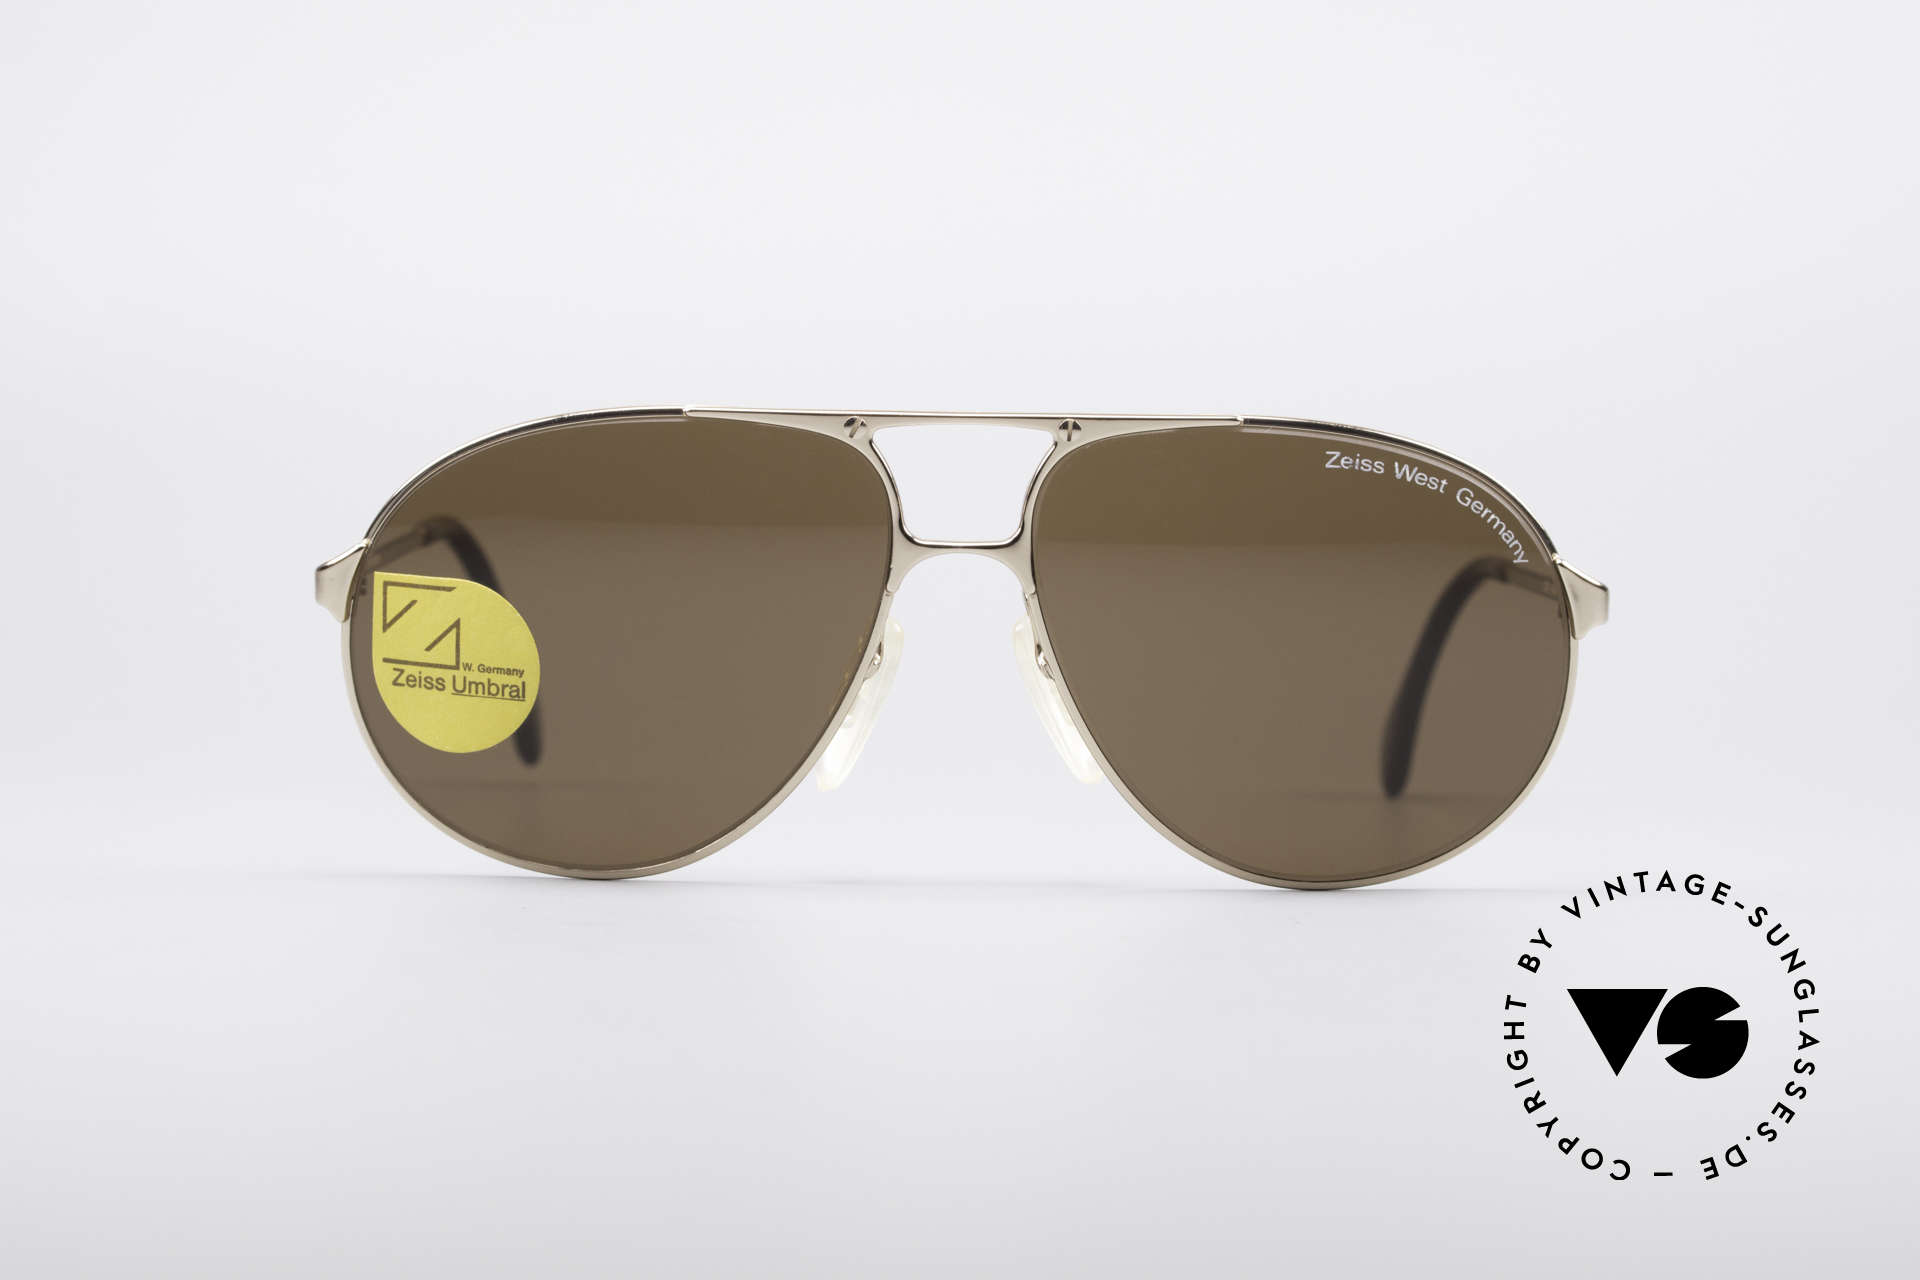 Sunglasses Zeiss 9289 Umbral Quality lenses